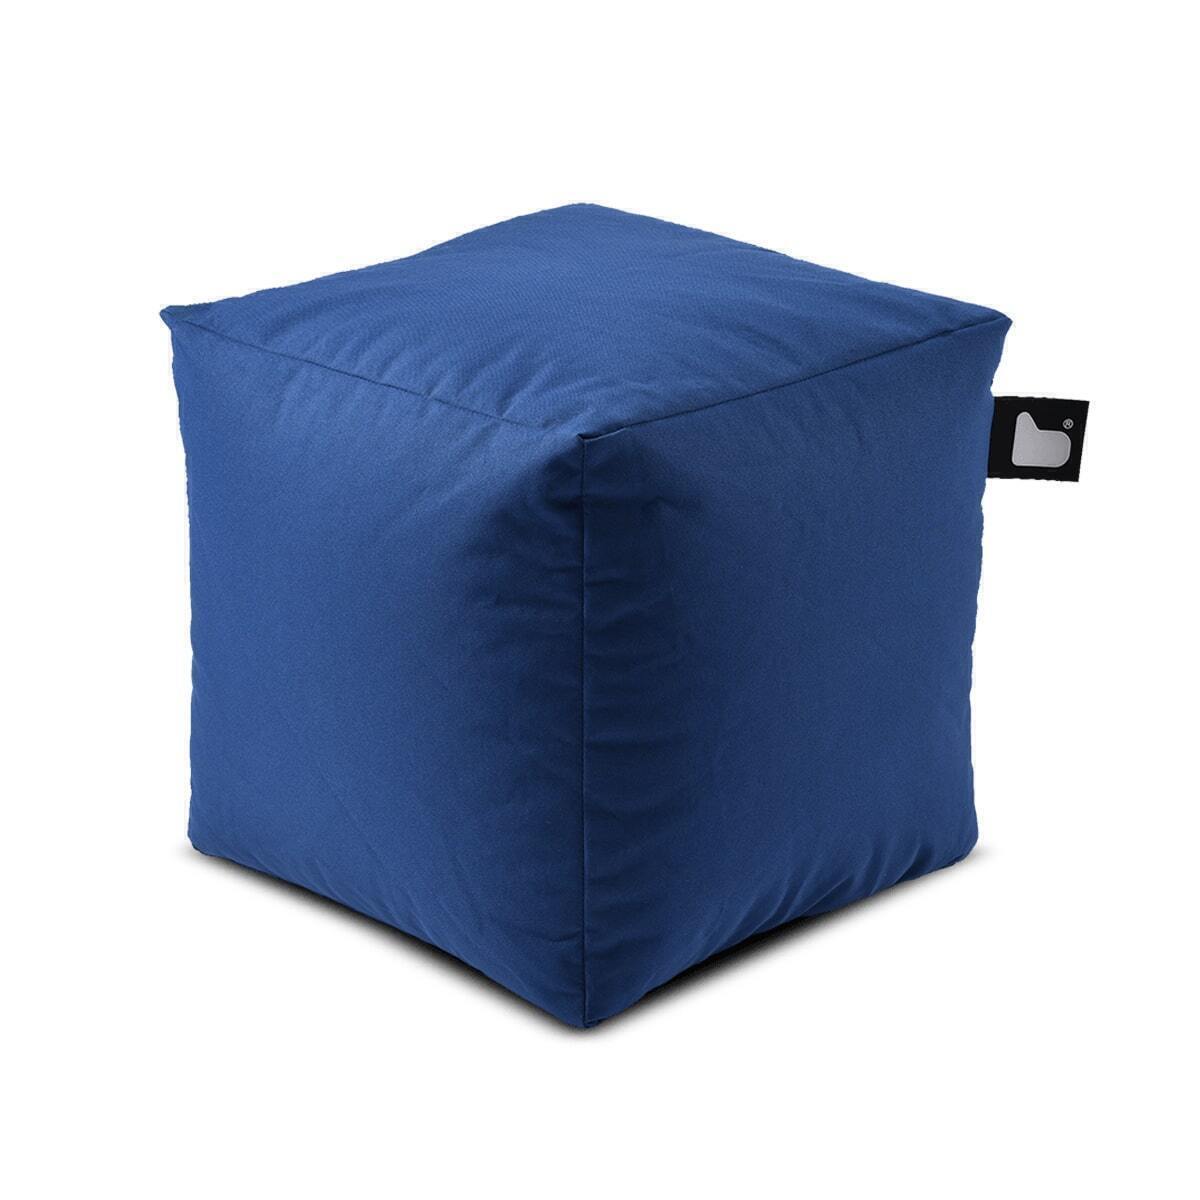 Extreme Lounging - Outdoor Bean Box  - Royal product image